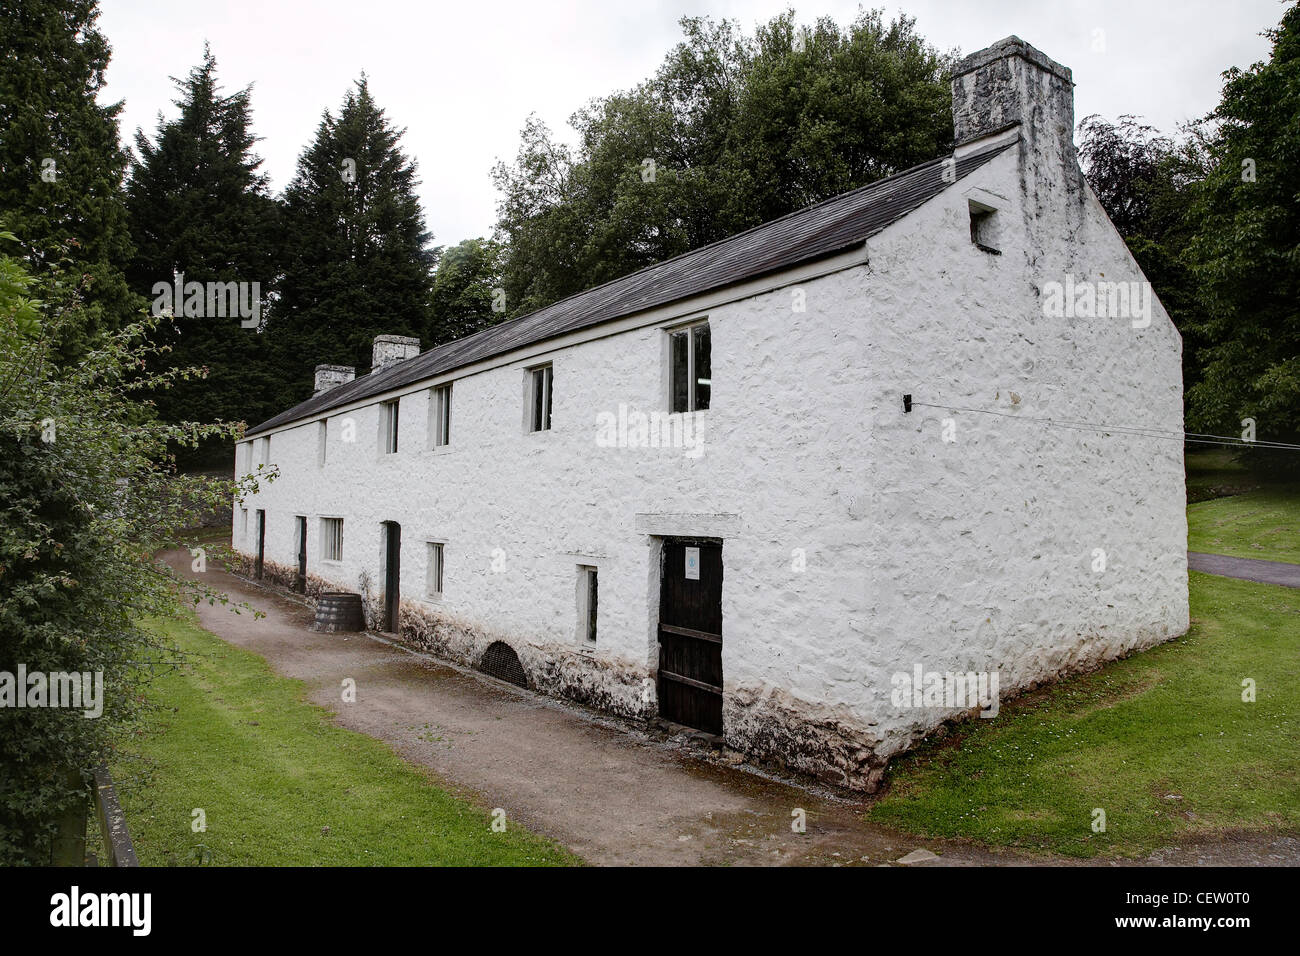 Woolen mill at St fagans, National history museum of Welsh life. Originally built in 1760 and moved to the museum in 1949. Stock Photo